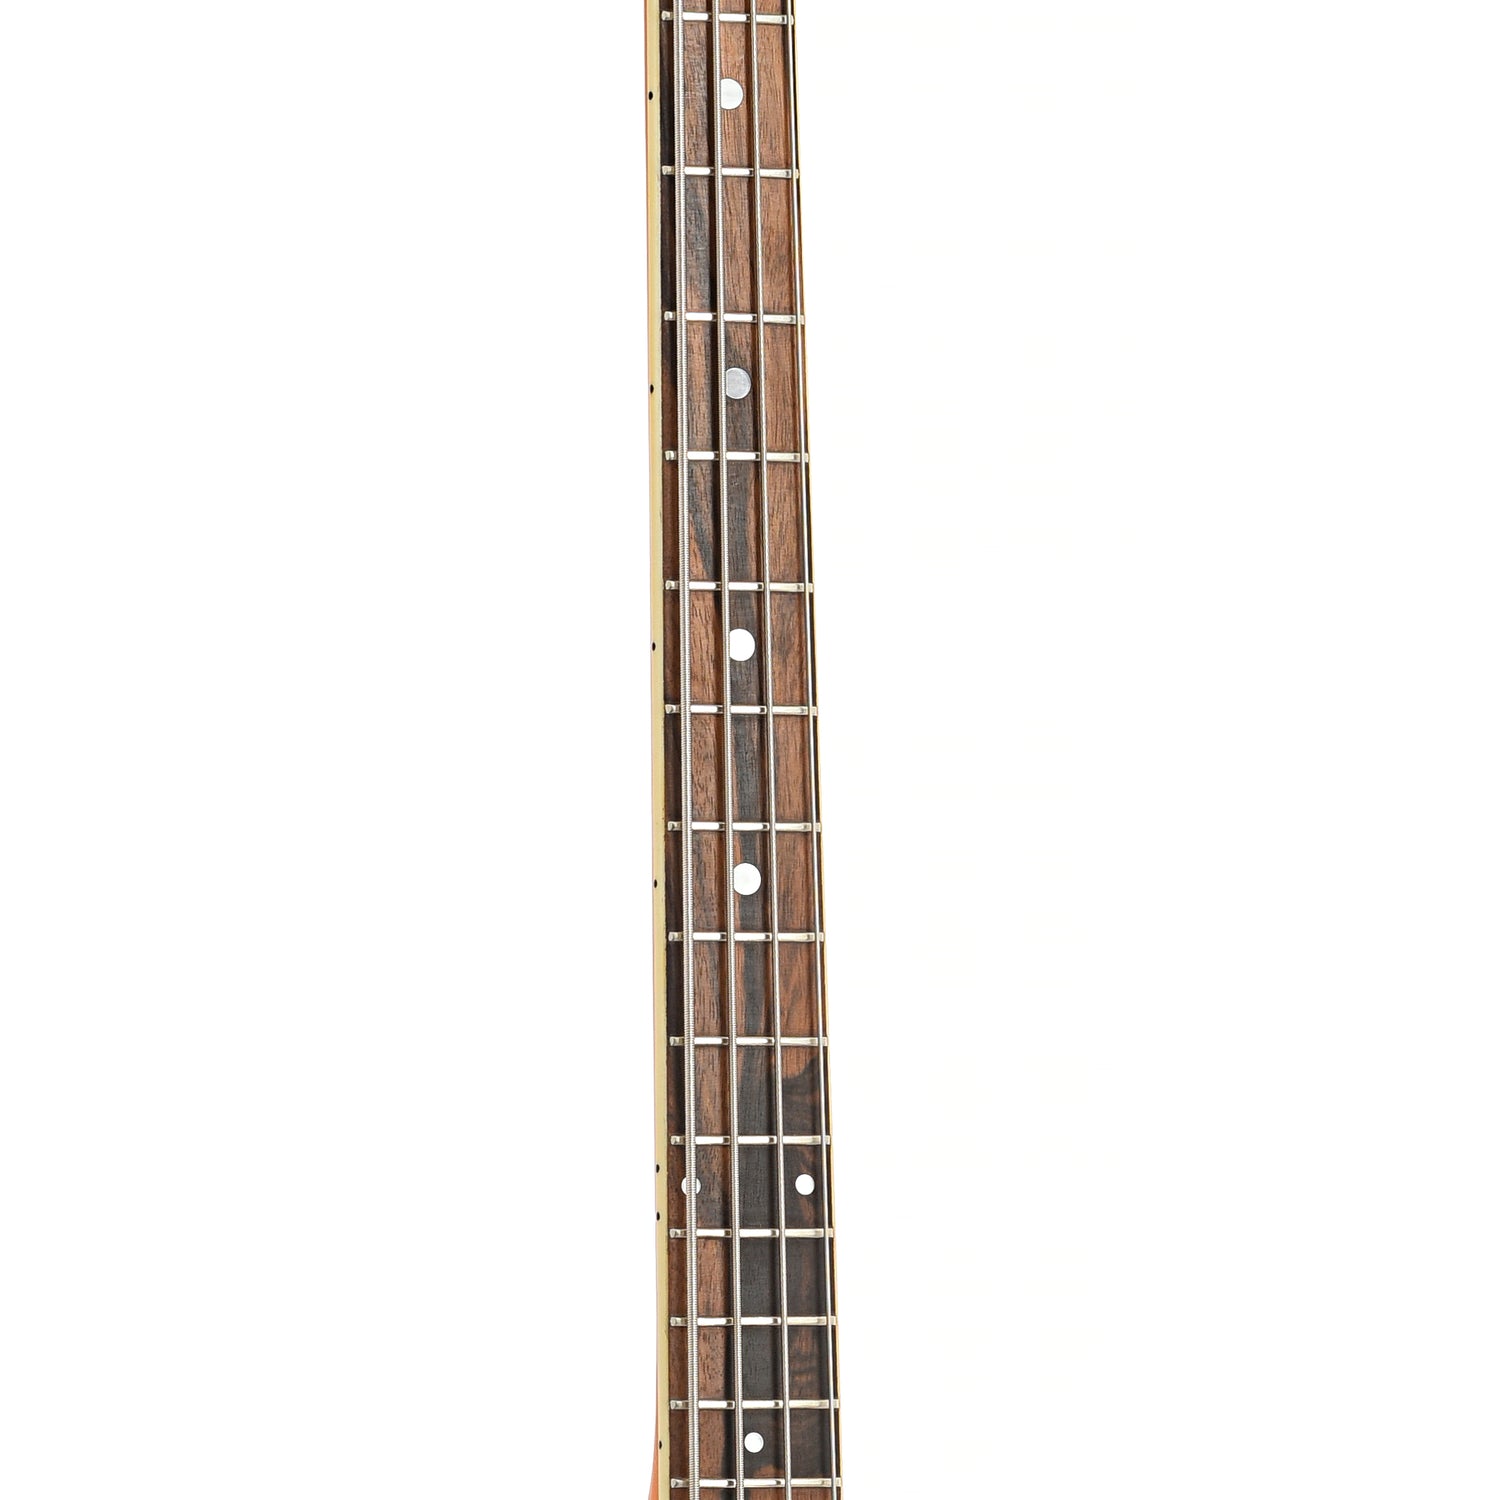 Fretboard of Vox Sidewinder IV Hollow Body Electric Bass (1960's)